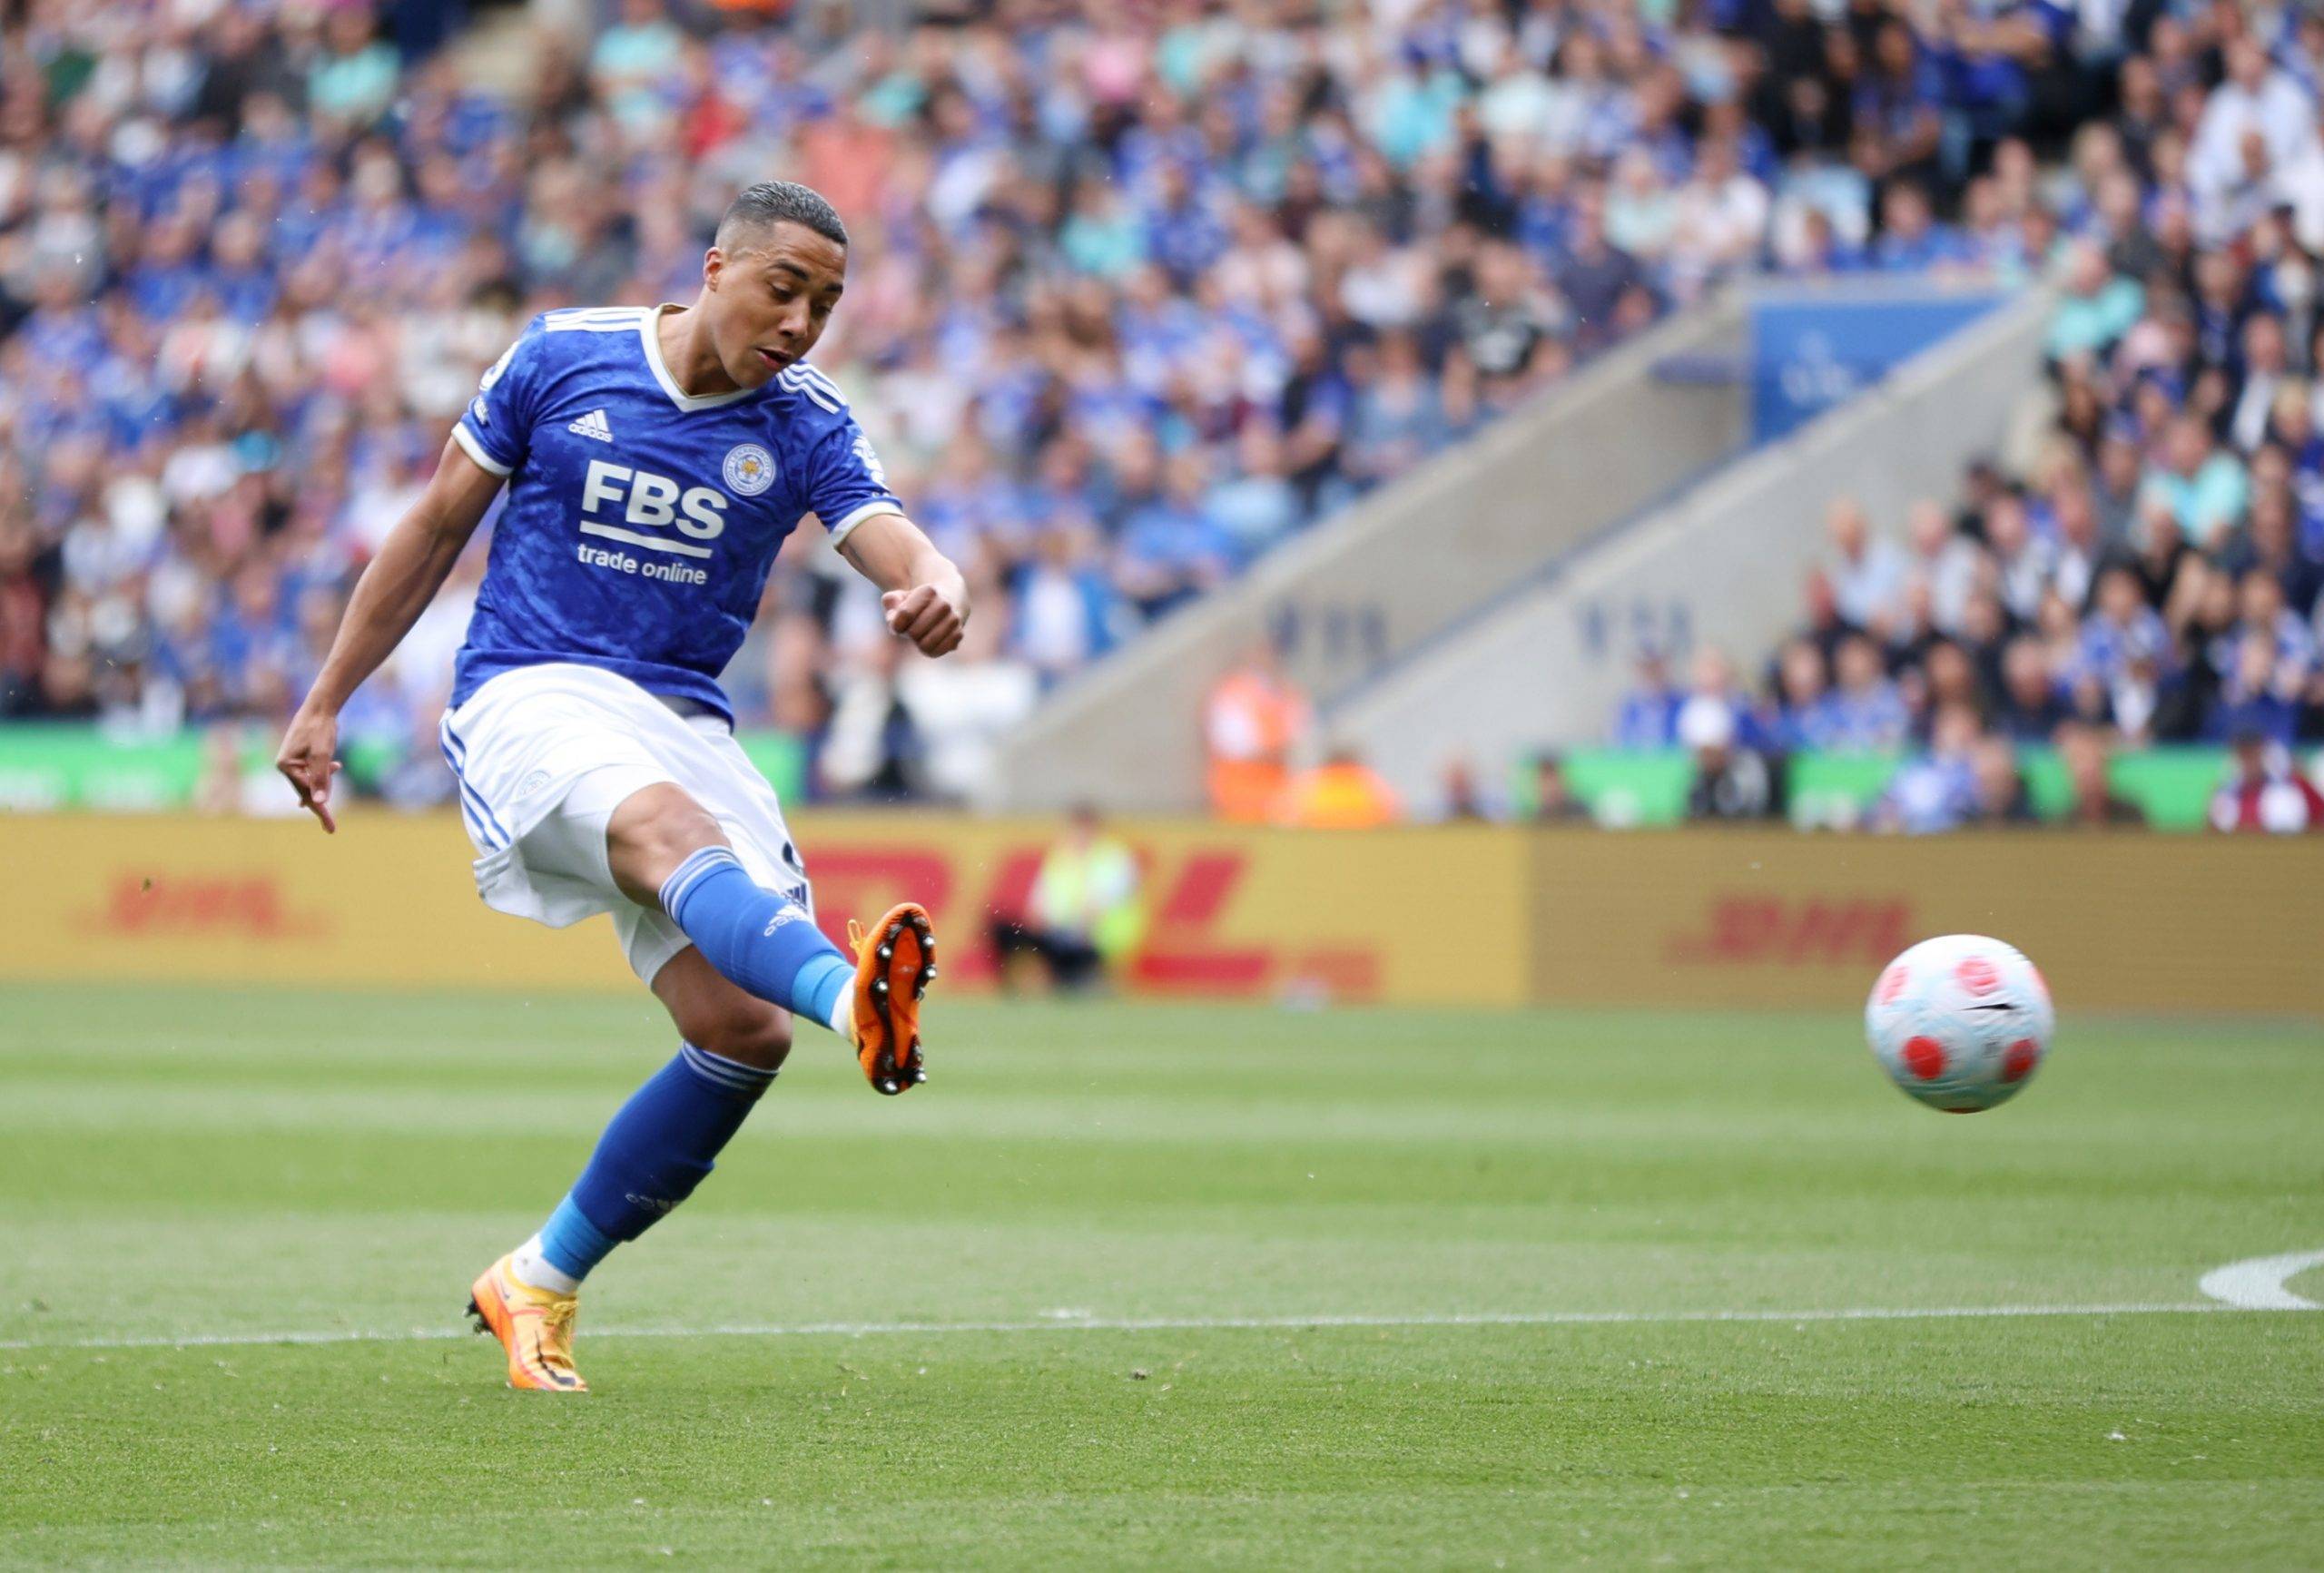 Newcastle United: Opportunity to sign Youri Tielemans in January - Follow up